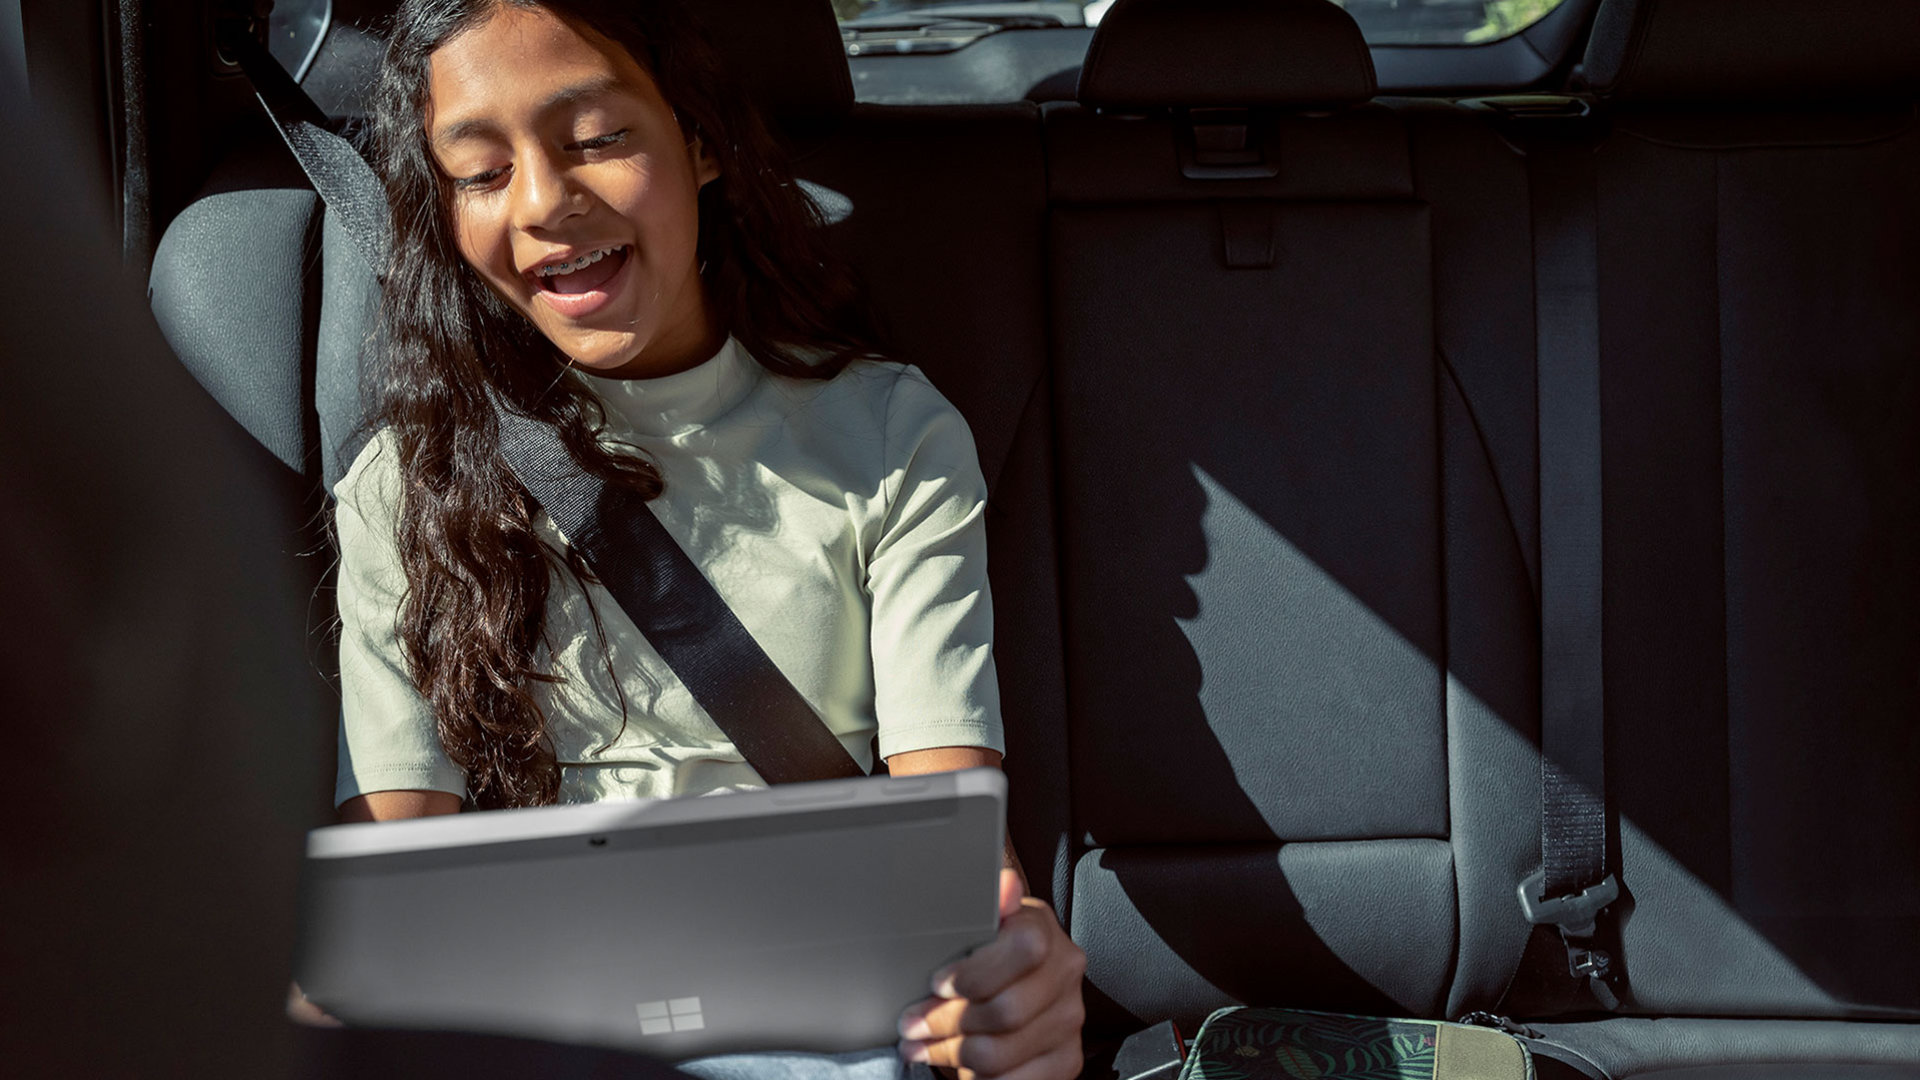 A child using a Surface Go 3 in the car.